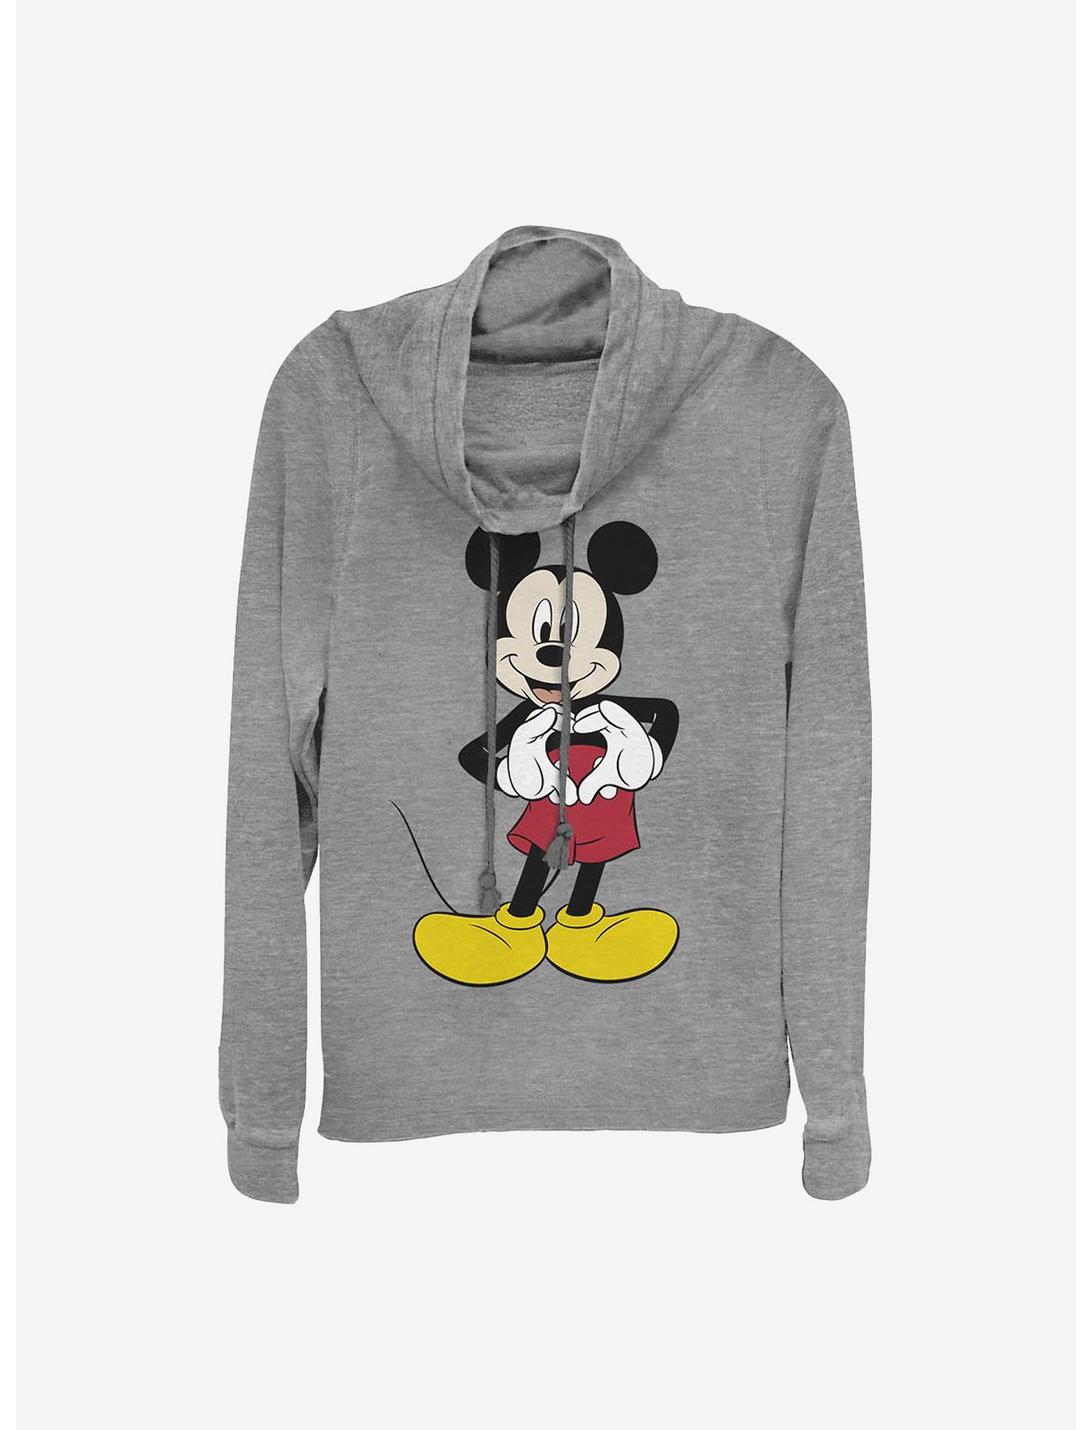 Disney Mickey Mouse Mickey Love Cowlneck Long-Sleeve Girls Top, GRAY HTR, hi-res